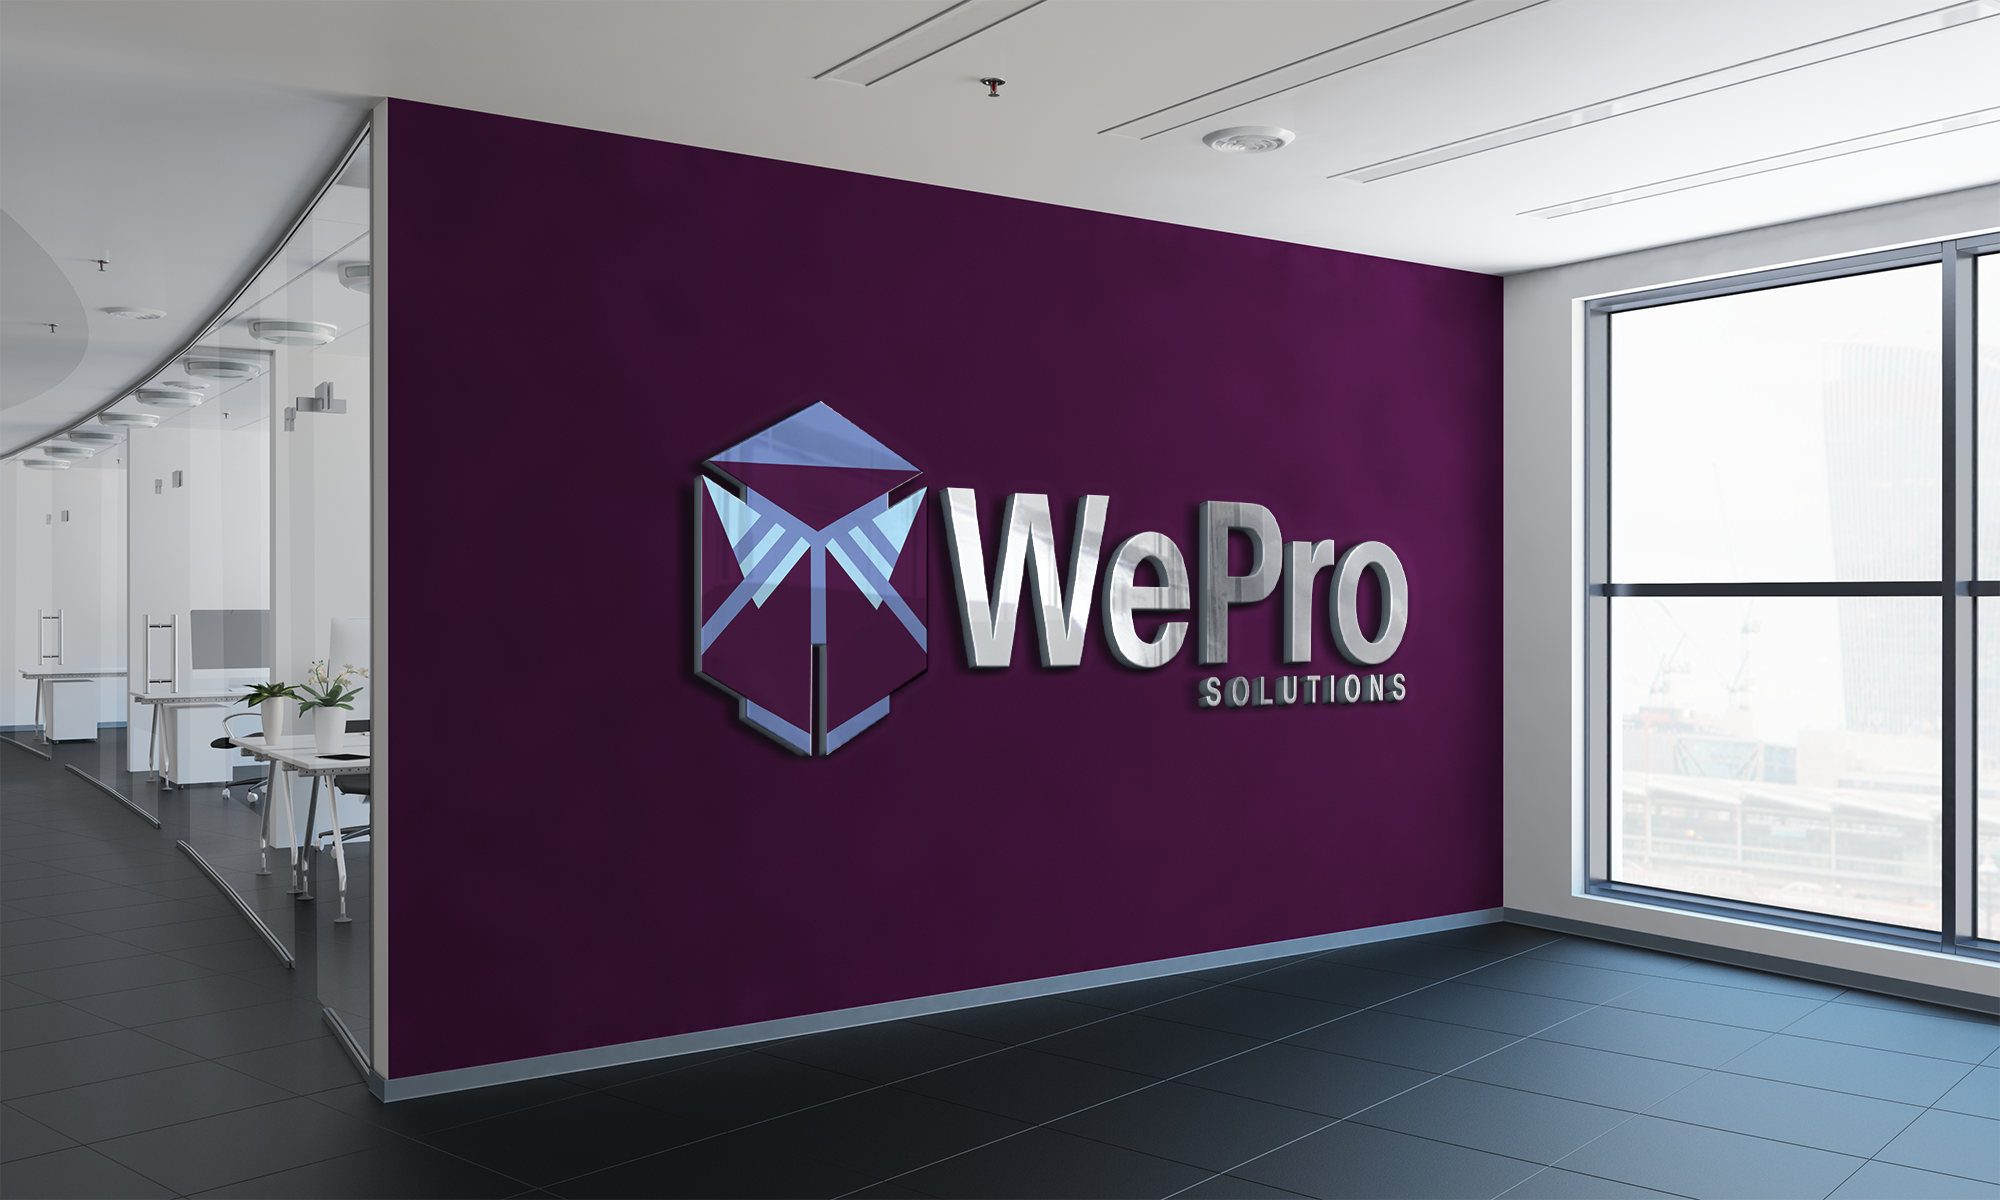 //wepro-solutions.com/wp-content/uploads/2022/05/wepro-office2.png